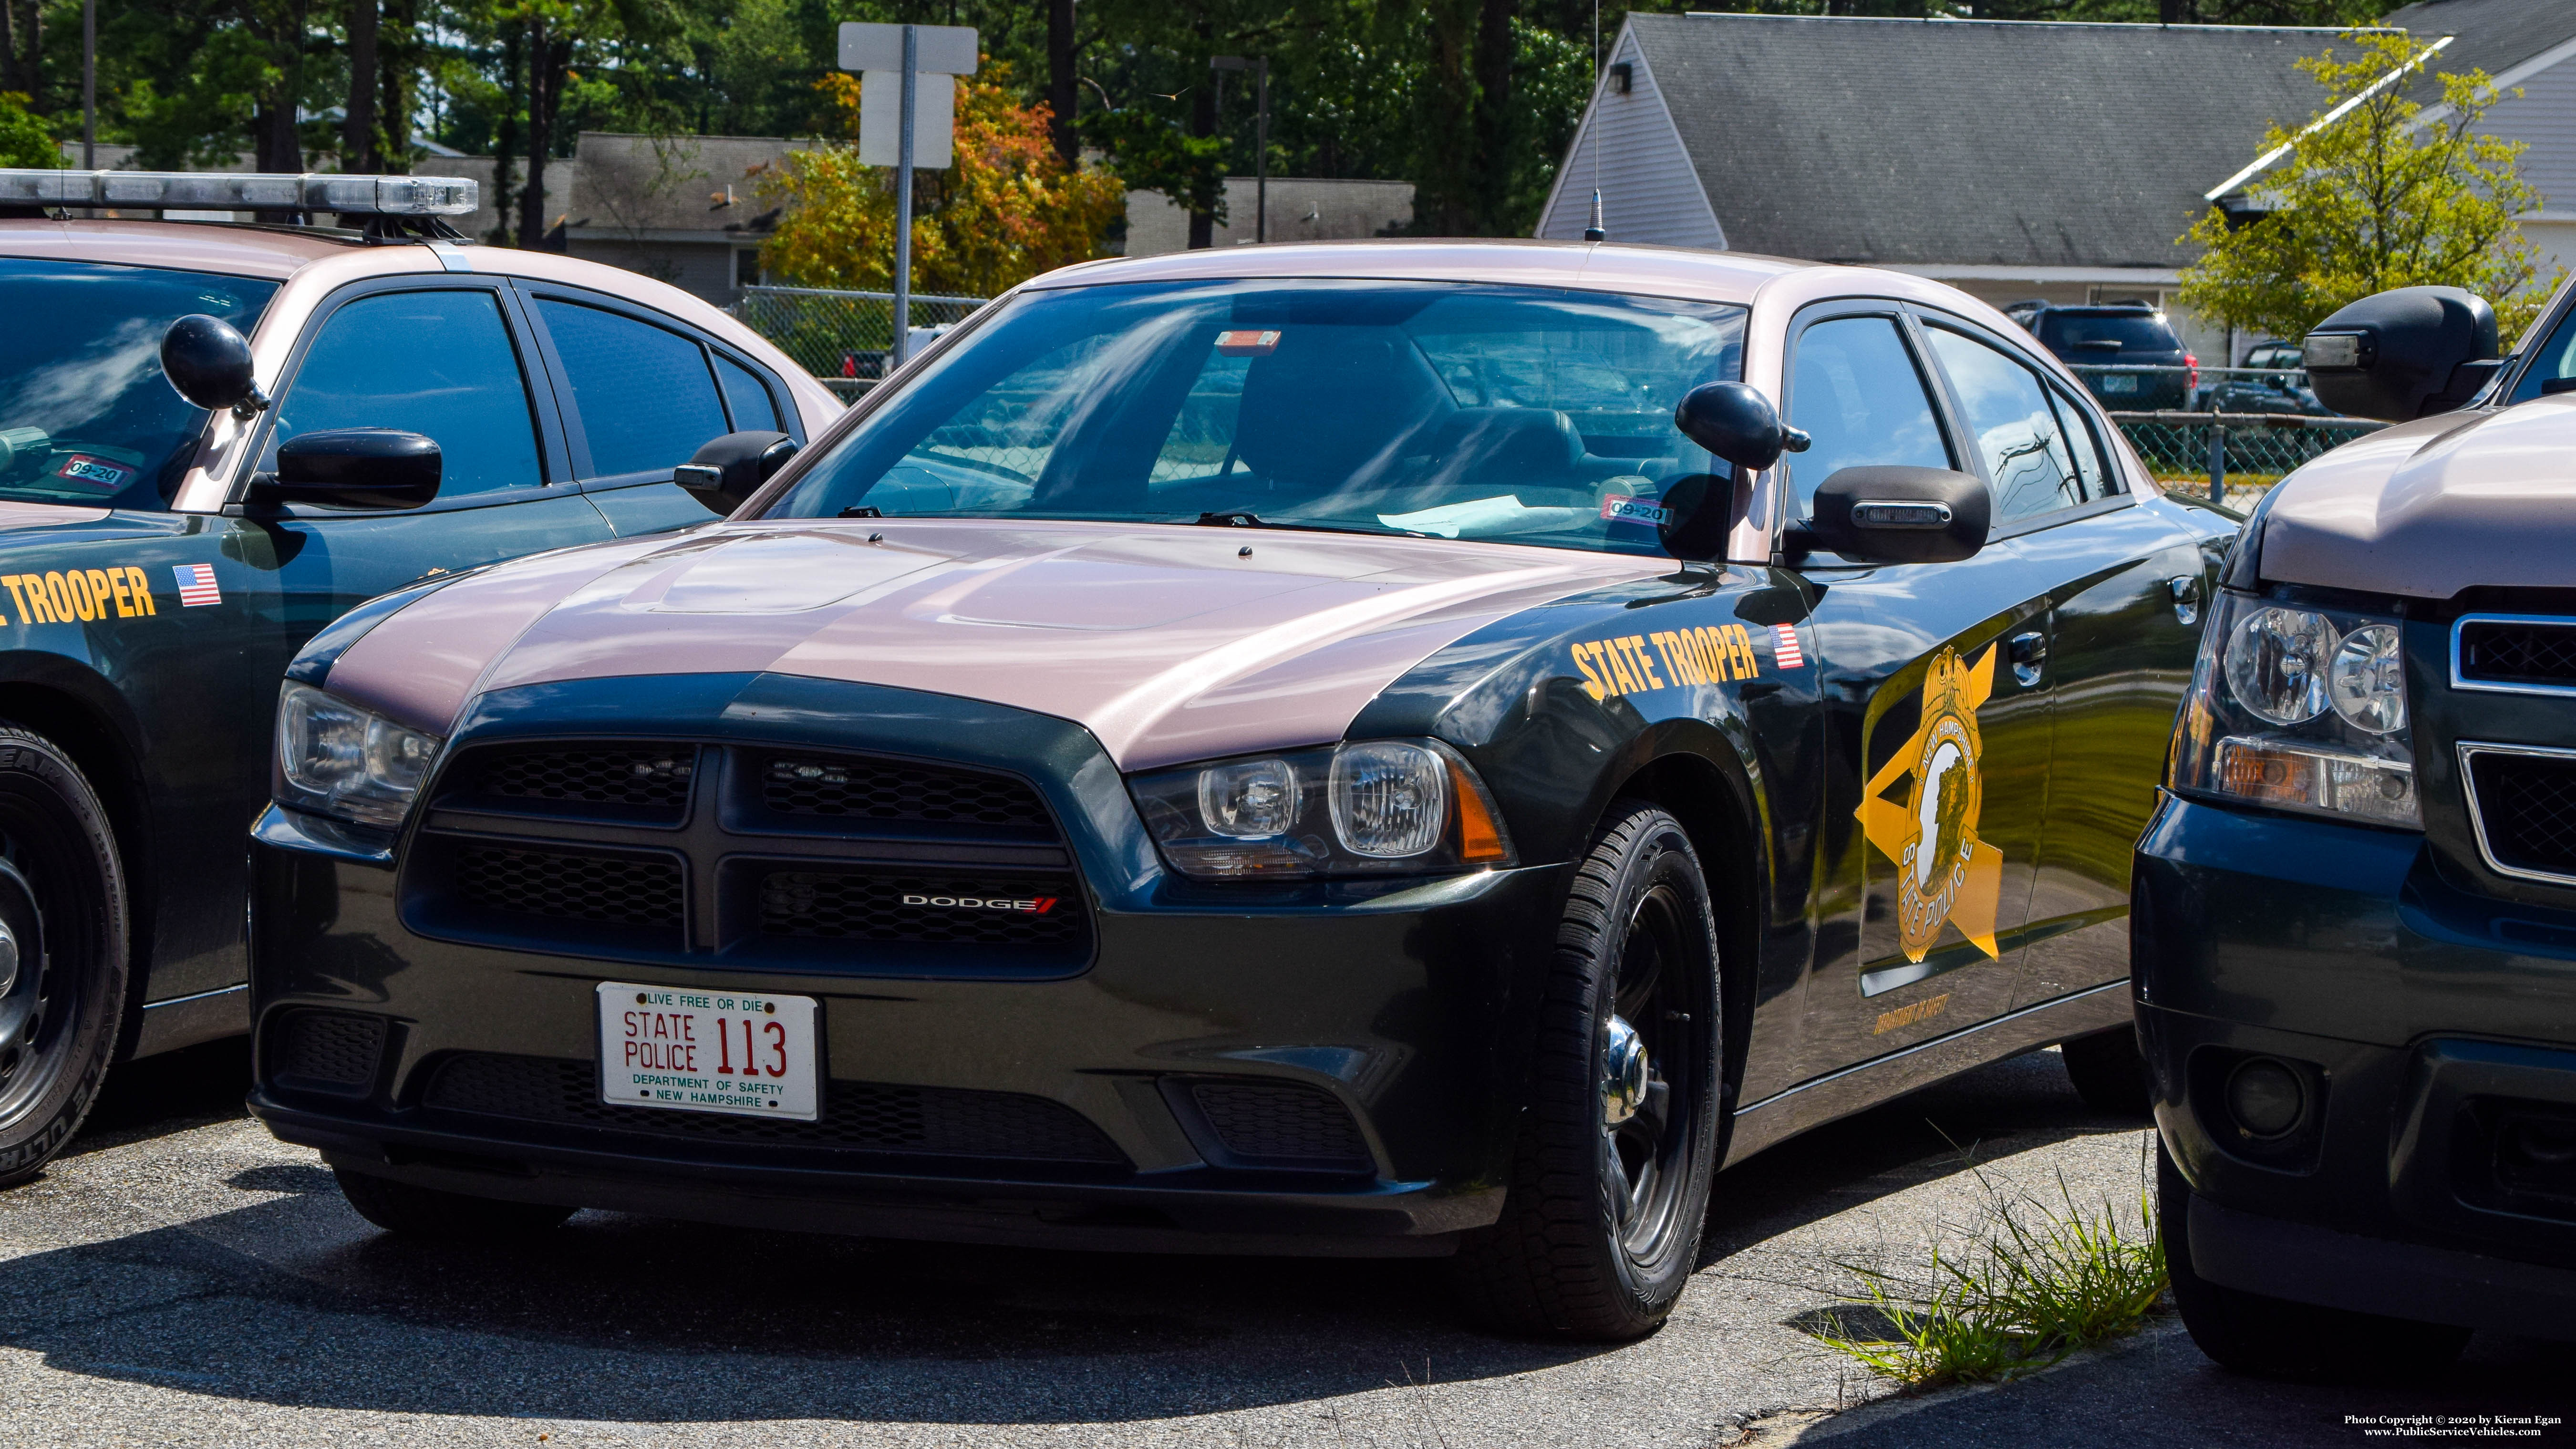 A photo  of New Hampshire State Police
            Cruiser 113, a 2011-2014 Dodge Charger             taken by Kieran Egan